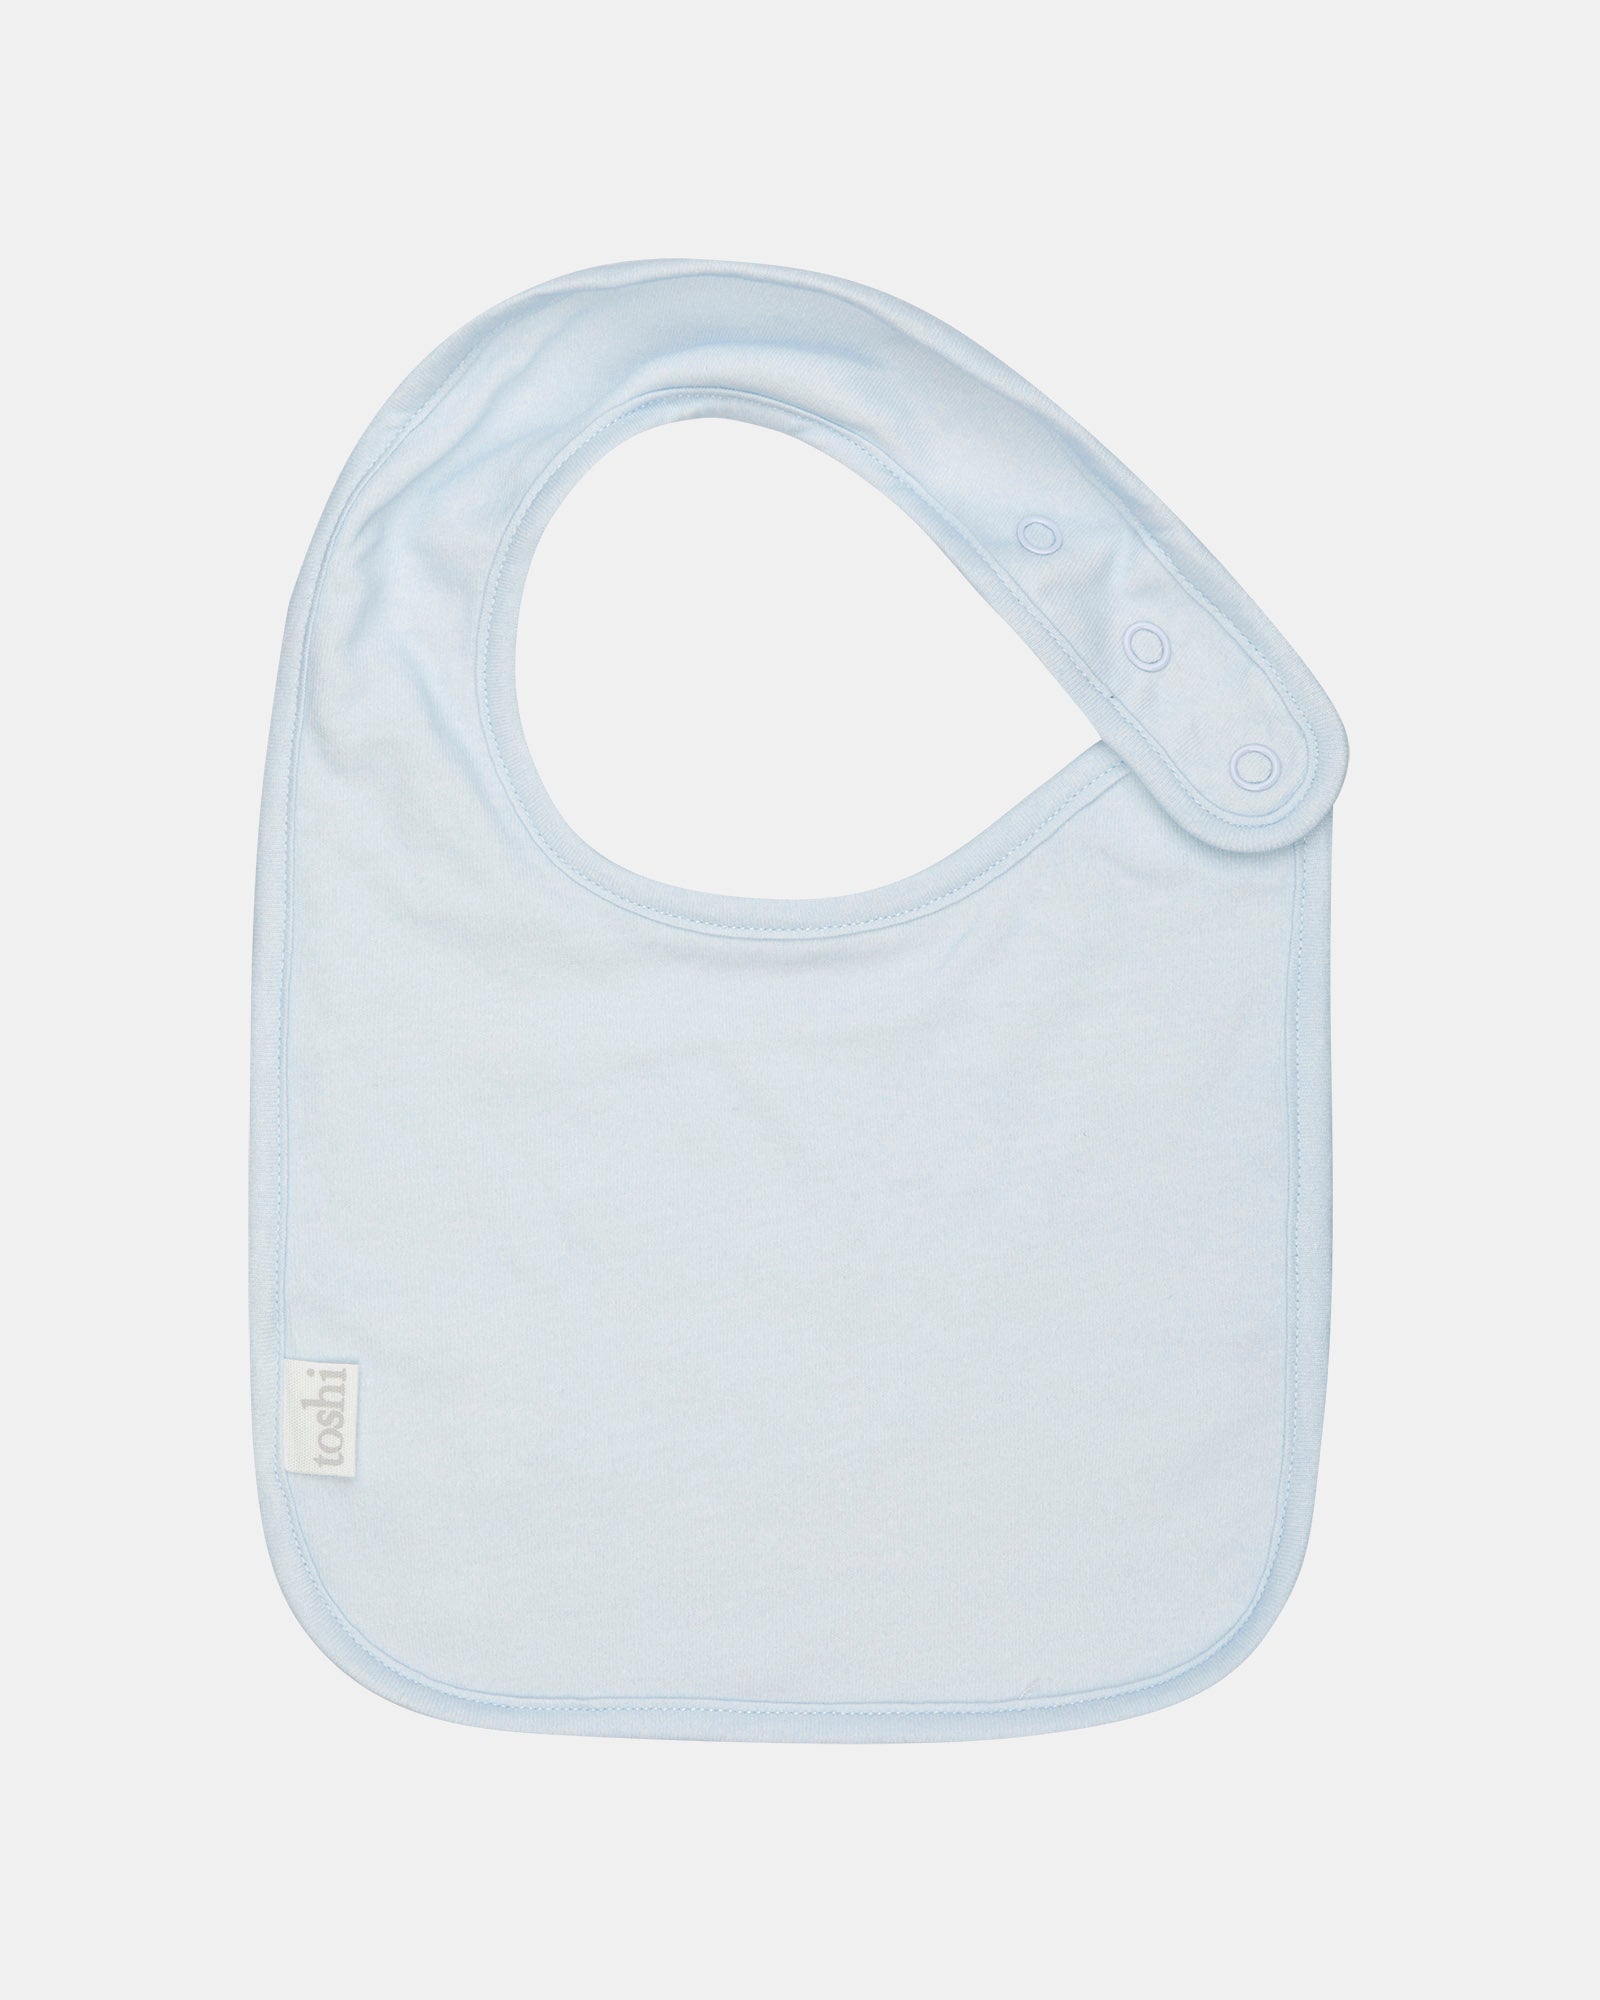 Baby Bib Story 2pcs - Sheep Station-Clothing & Accessories-Toshi-The Bay Room